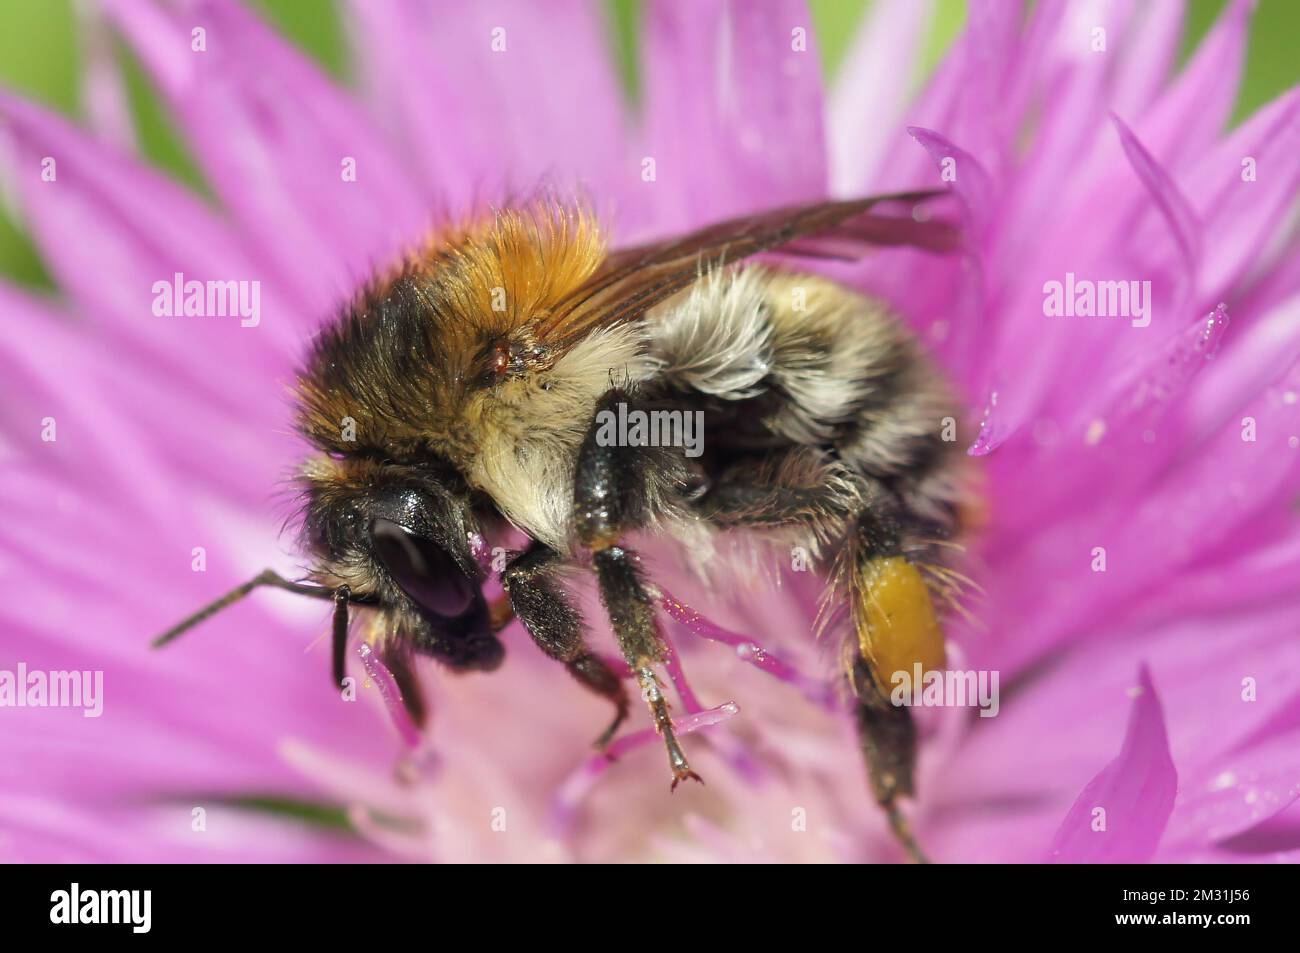 Natural closeup on a female worker brown banded carder bumblebee , Bombus pascuorum, on a purple flower Stock Photo